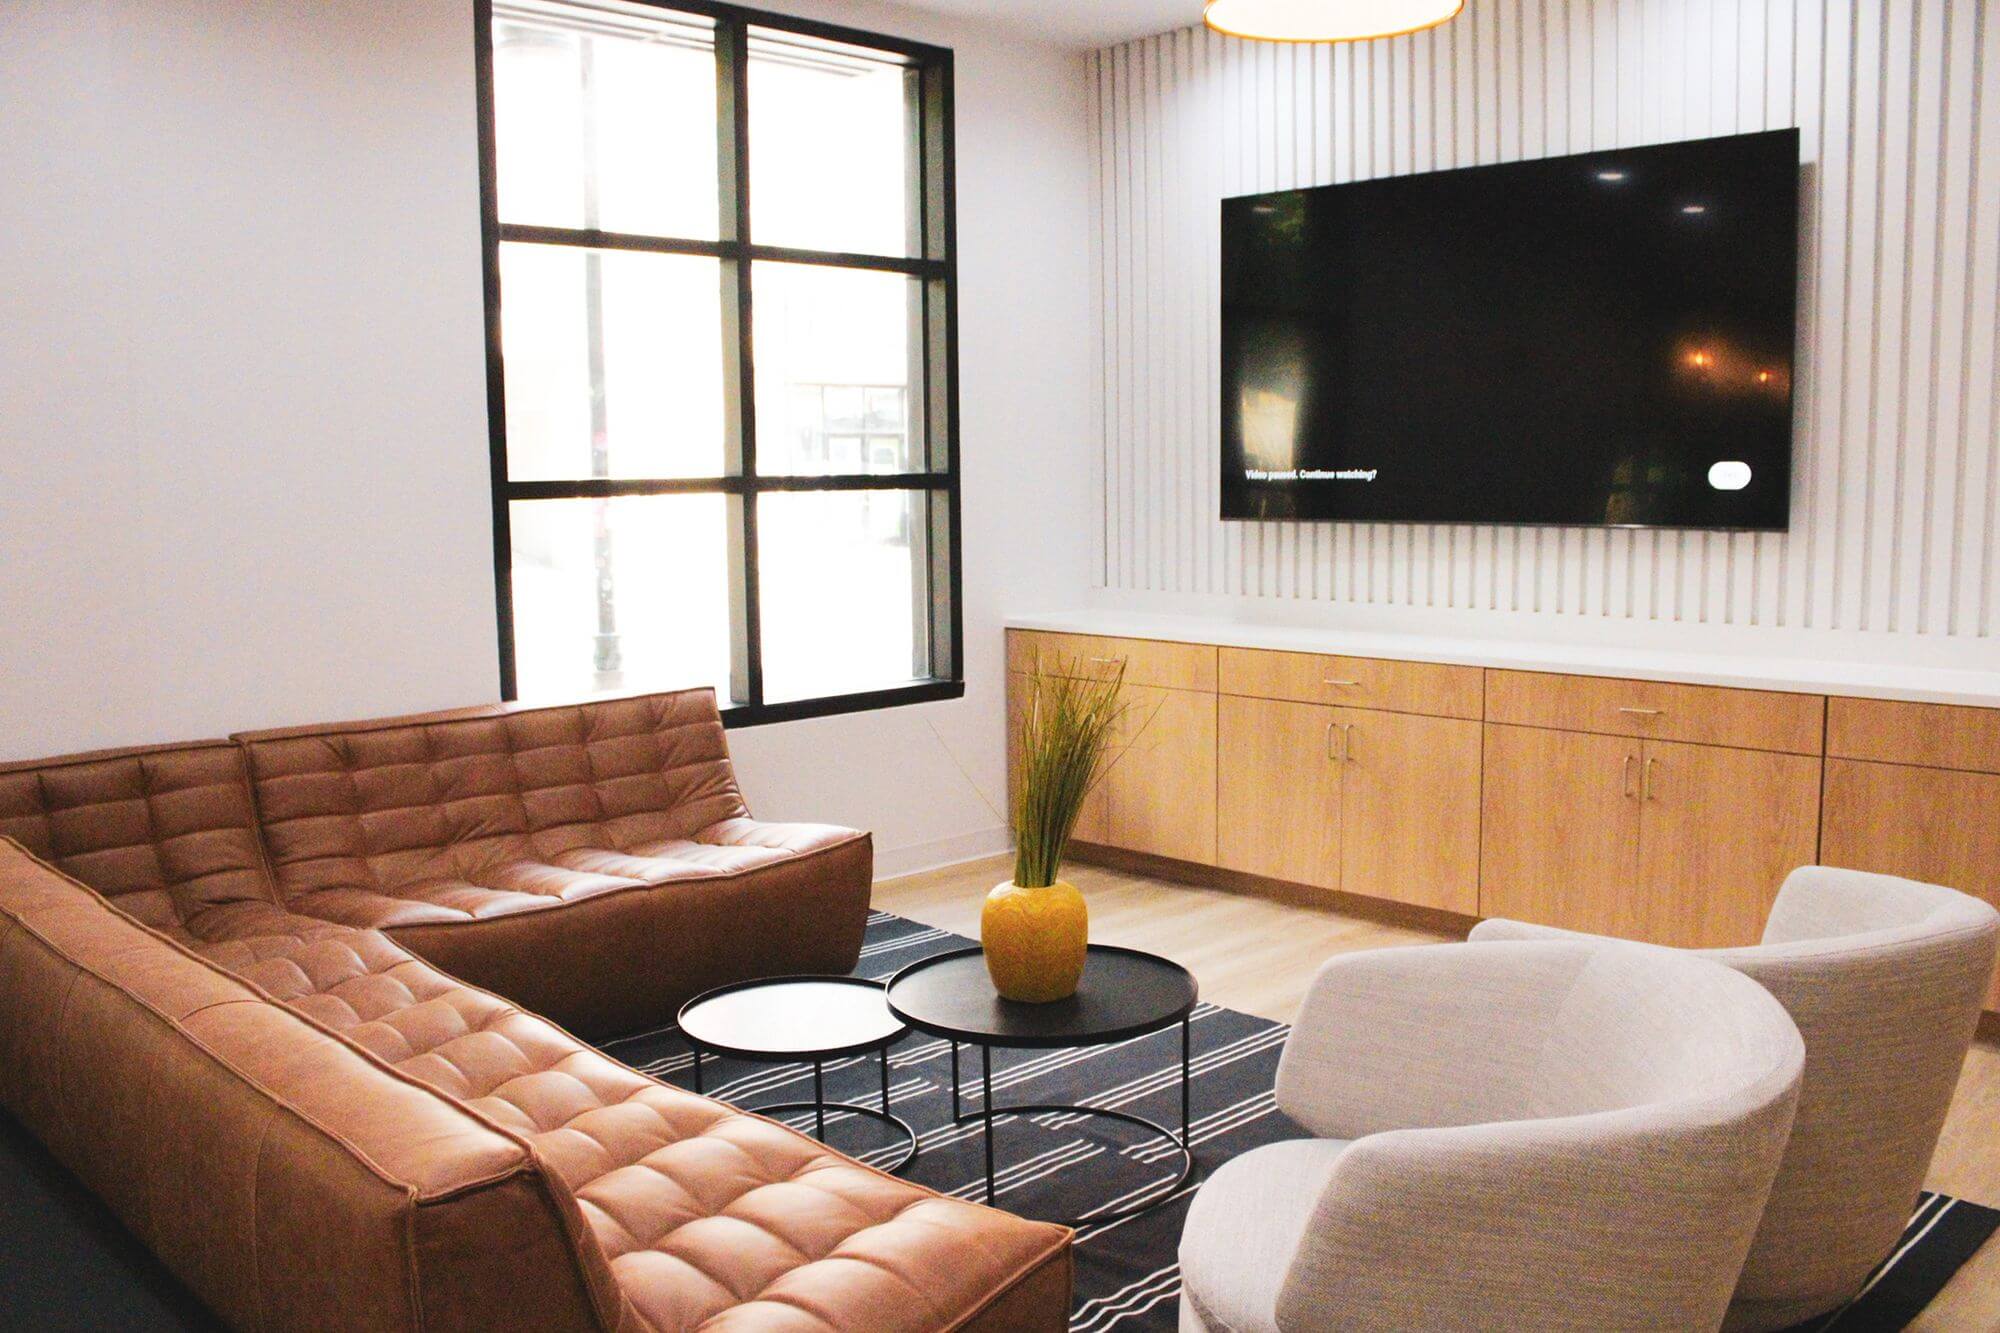 sparq-on-rio-apartments-near-ut-austin-resident-clubhouse-lounge-seating-and-tv